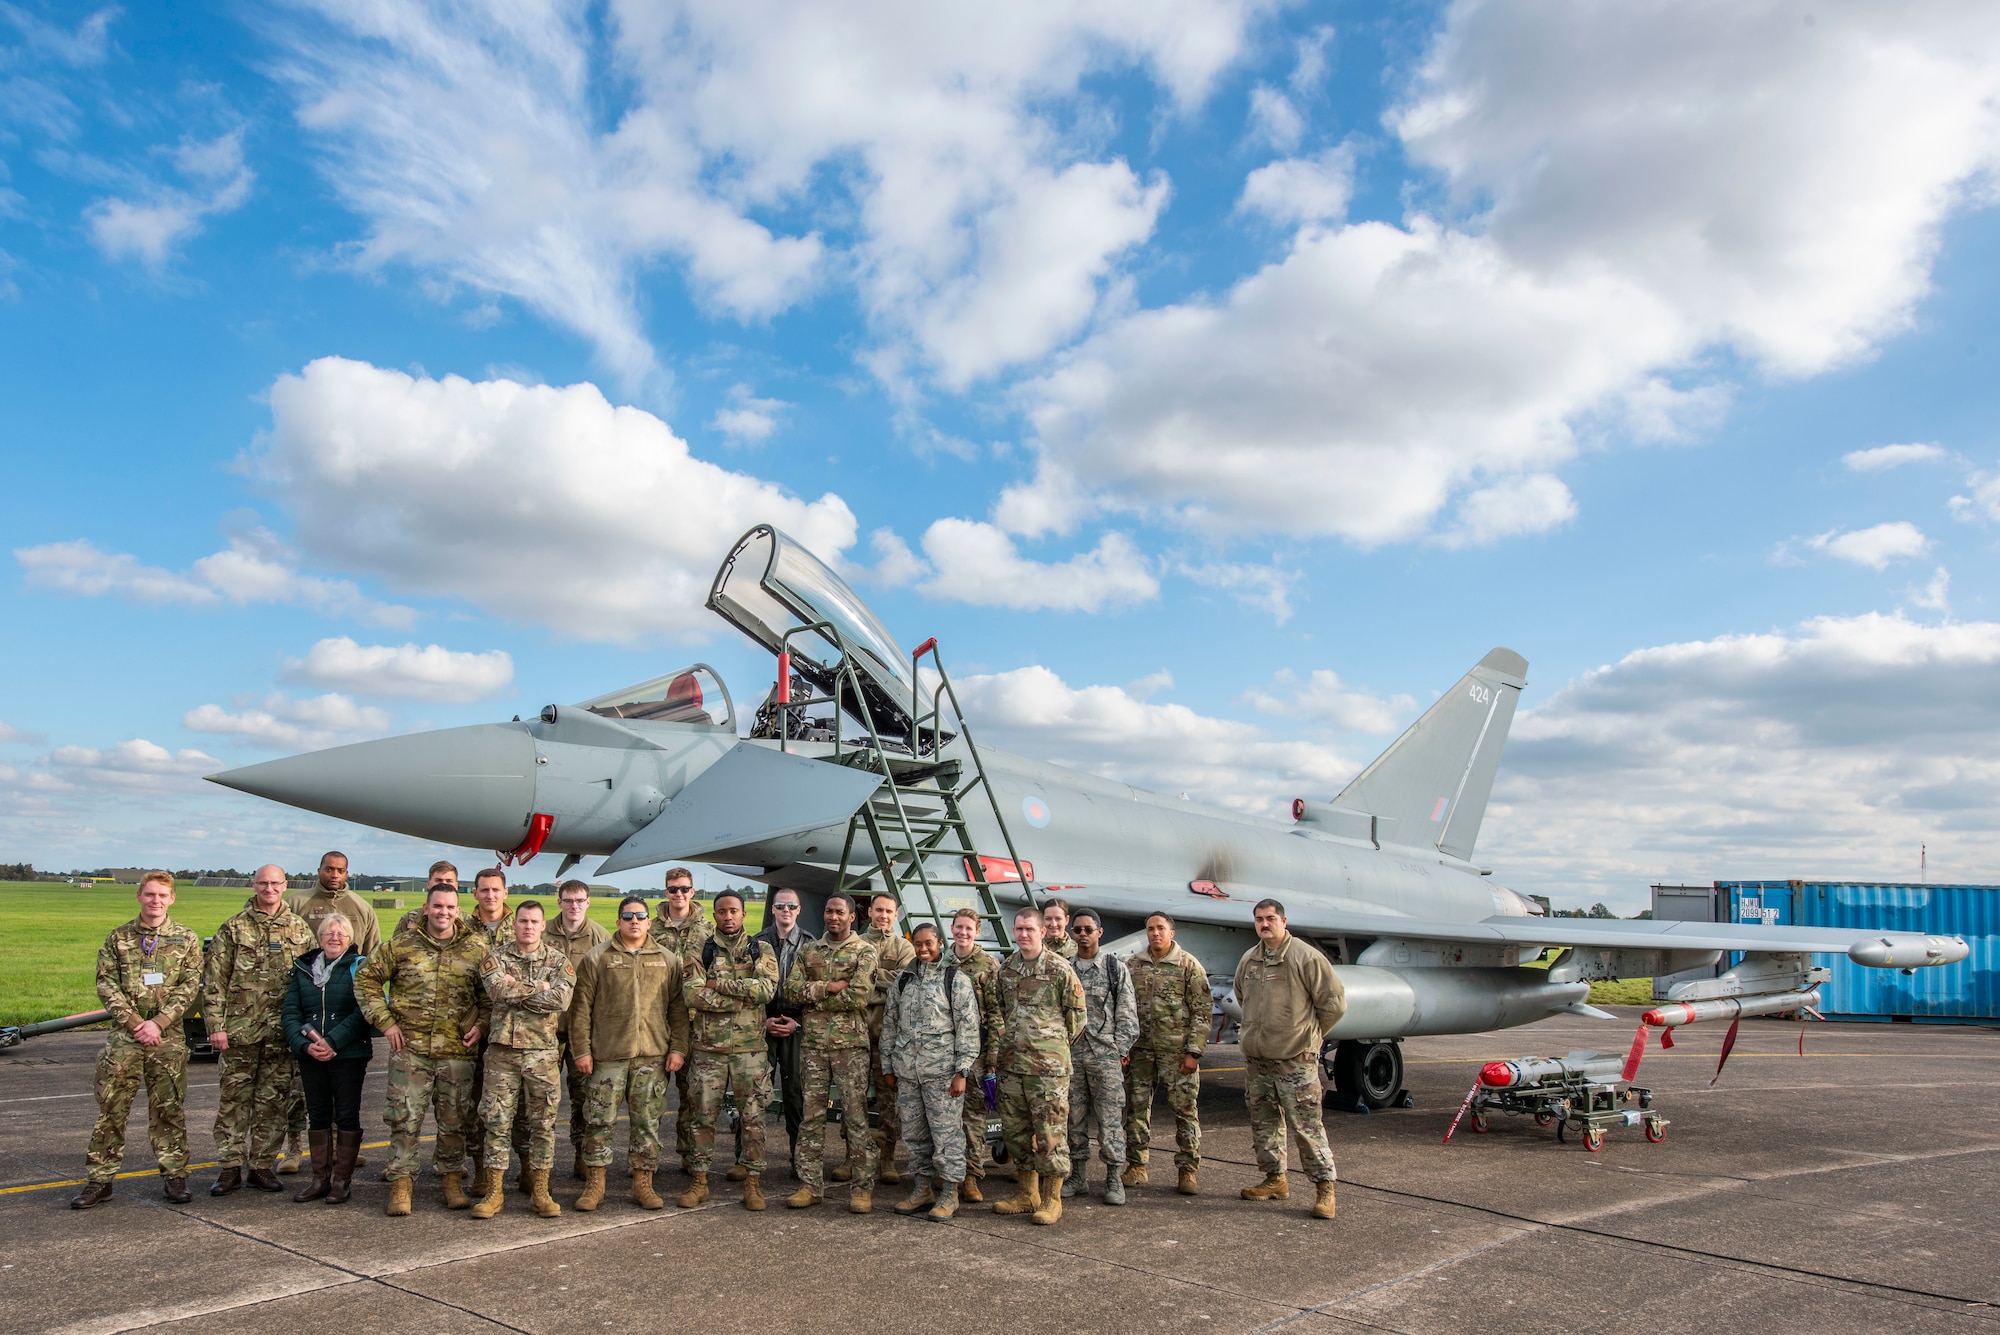 Team Mildenhall Airmen pose for a group photo in front of a Royal Air Force Typhoon FGR.Mk 4 aircraft at RAF Waddington, England, Oct. 22, 2019. The Airmen attended briefings and toured static aircraft displays during the RAF Air Combat Power visit. (U.S. Air Force photo by Airman 1st Class Joseph Barron).